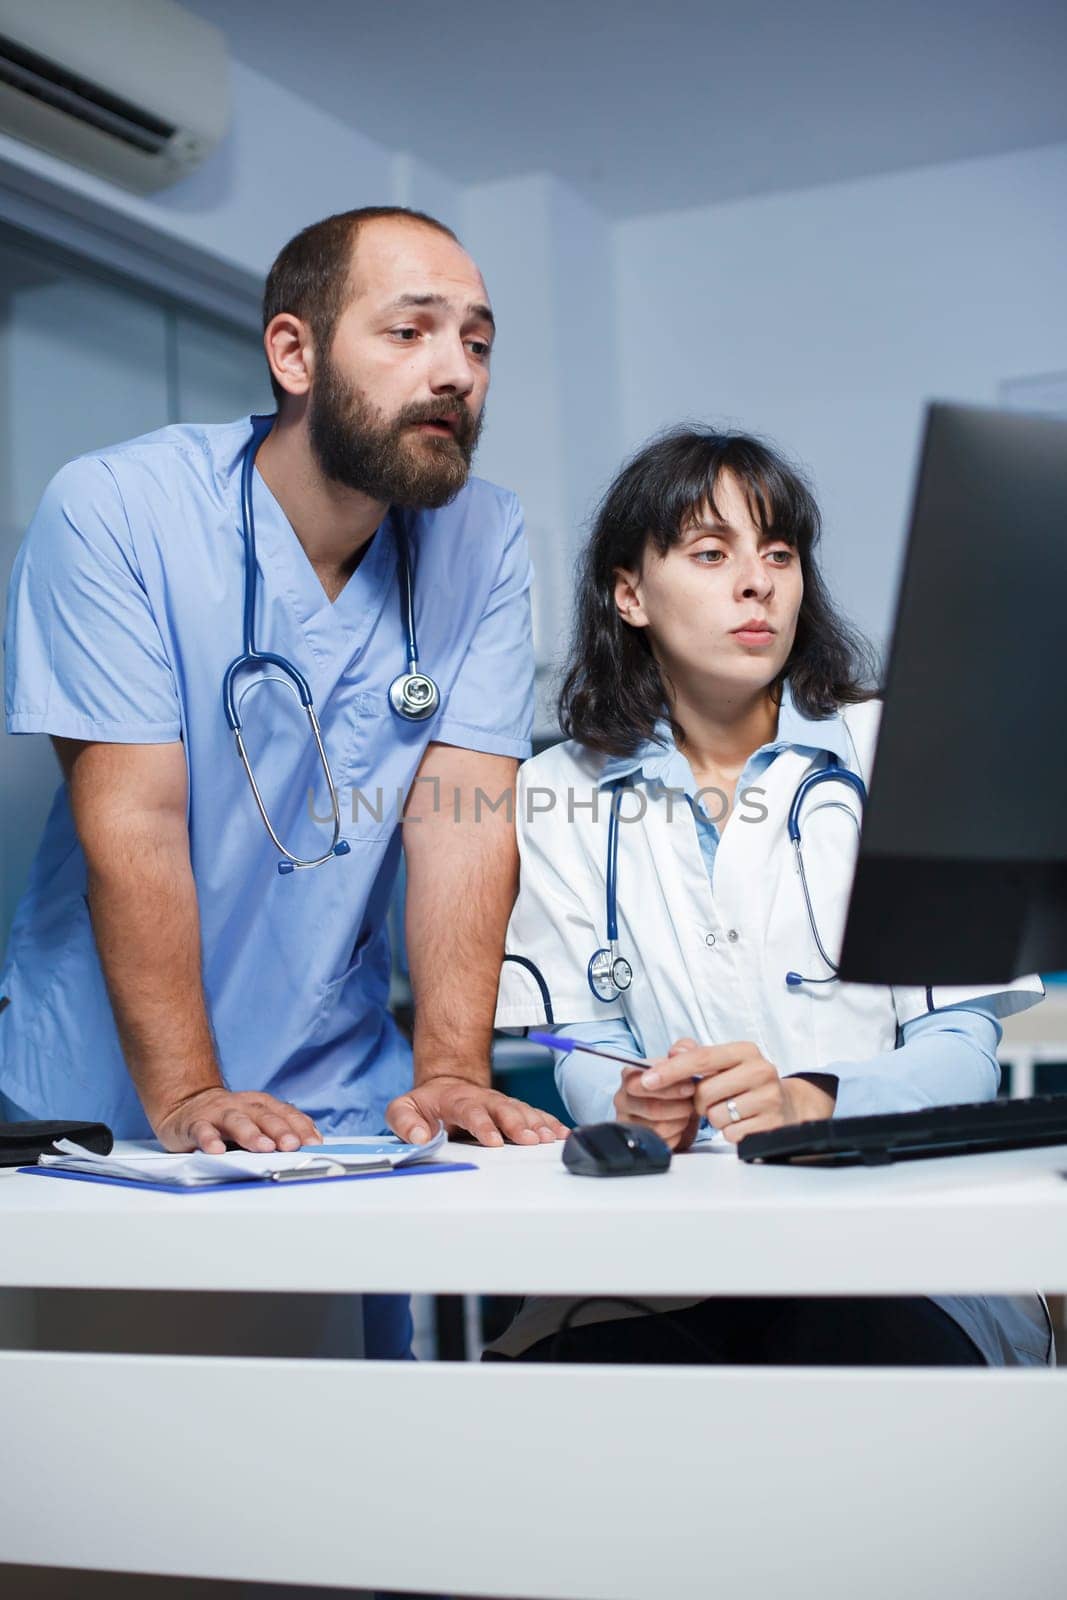 Healthcare professionals collaborate in a hospital, discussing patient care, utilizing digital devices like desktop computers. Effective communication and teamwork are highlighted.